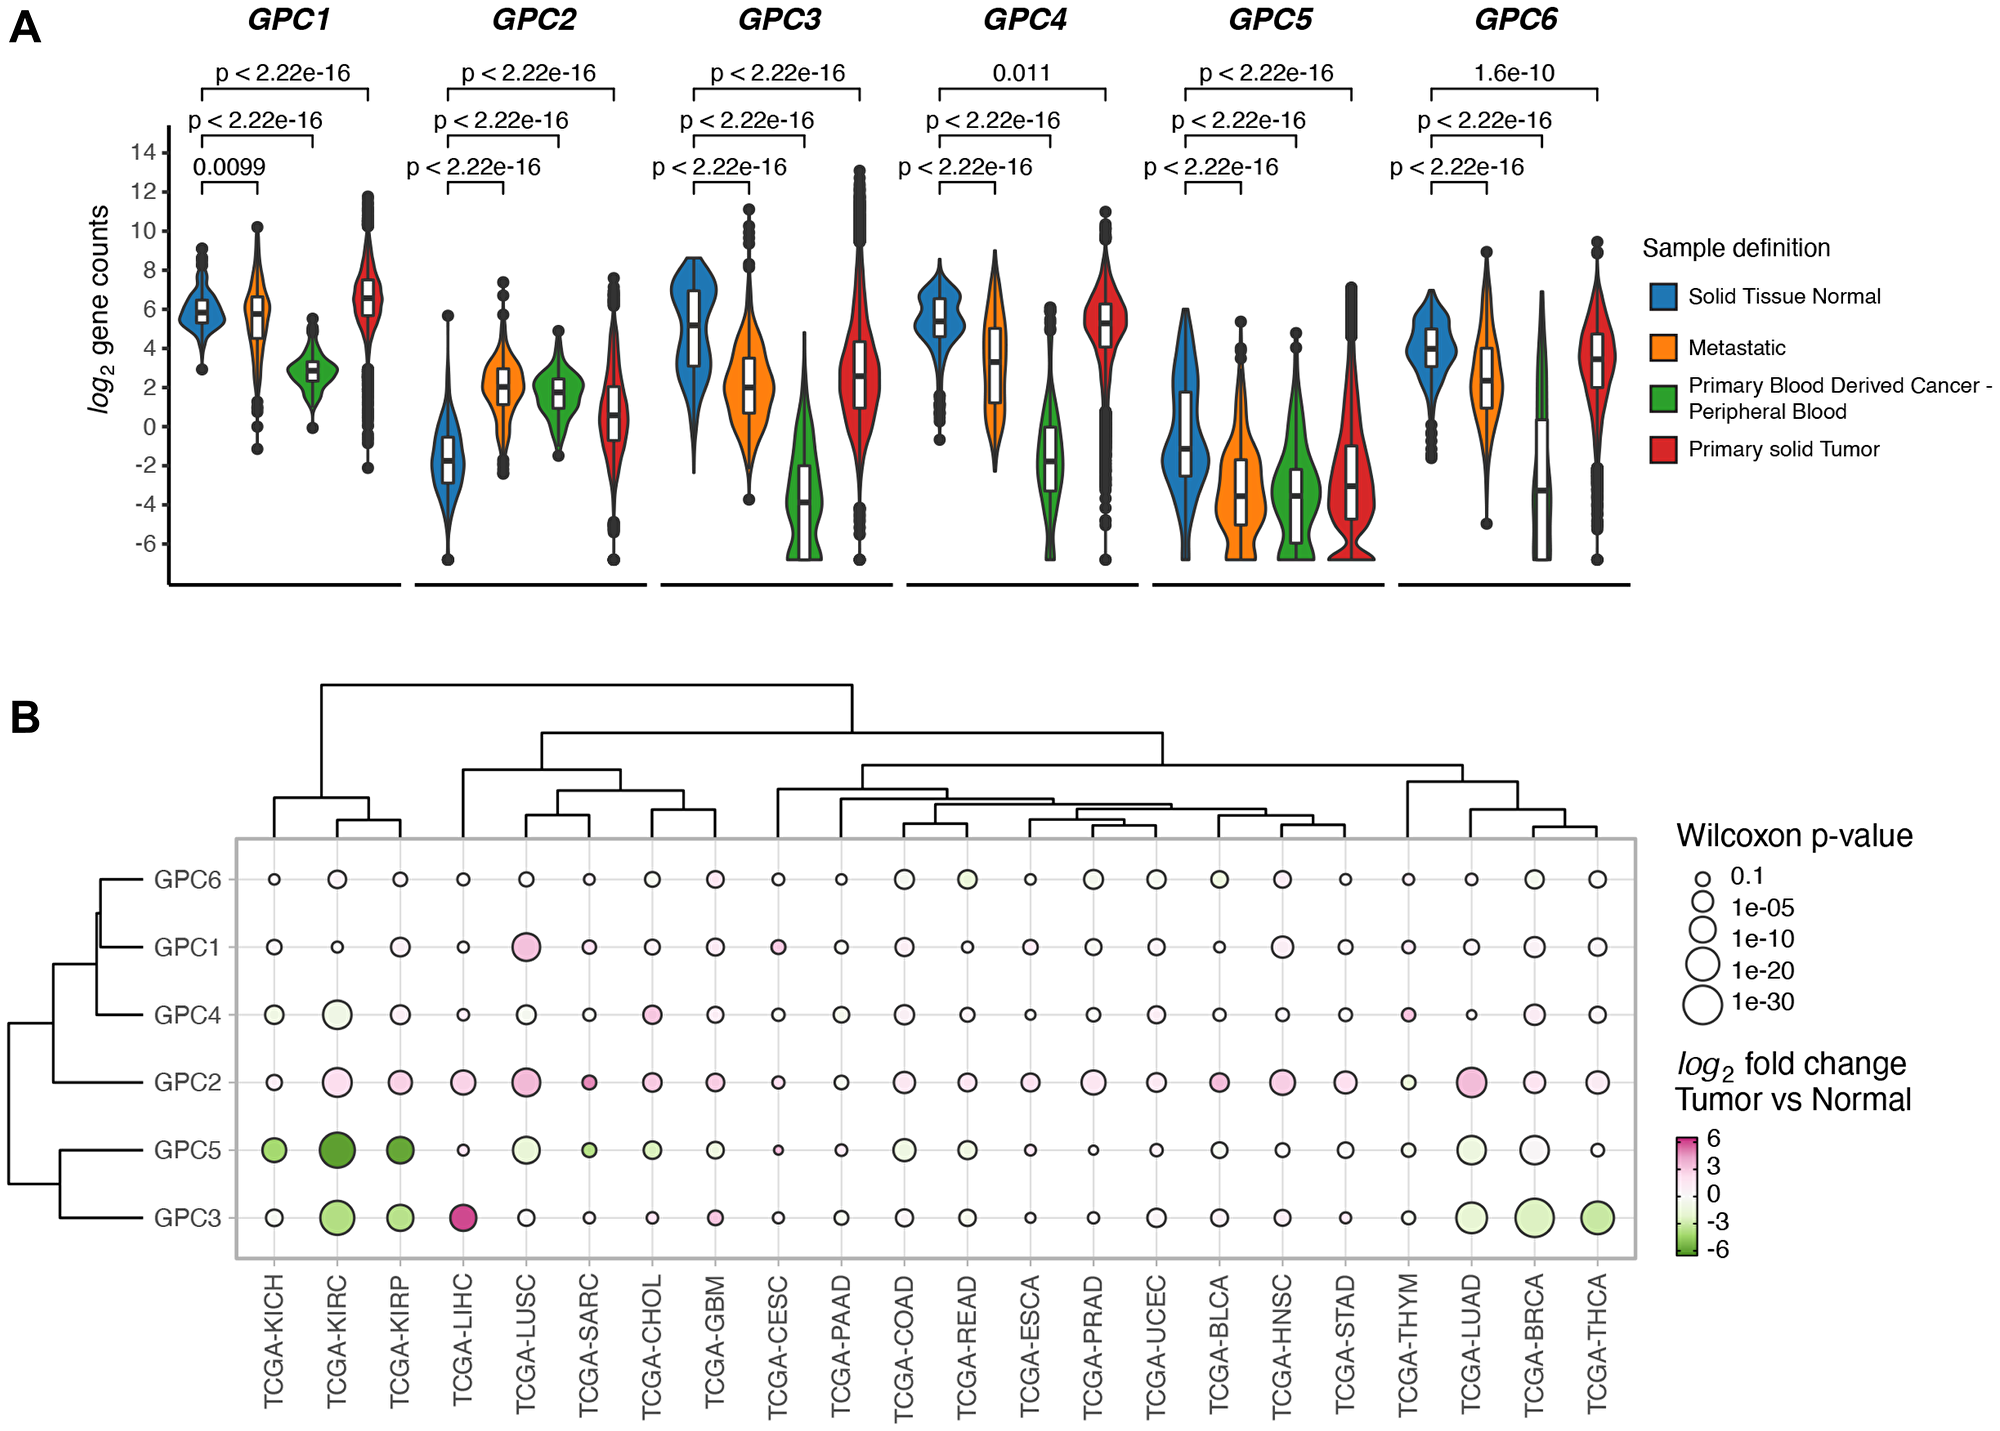 GPCs display sample specific and cancer type specific gene expression differences.